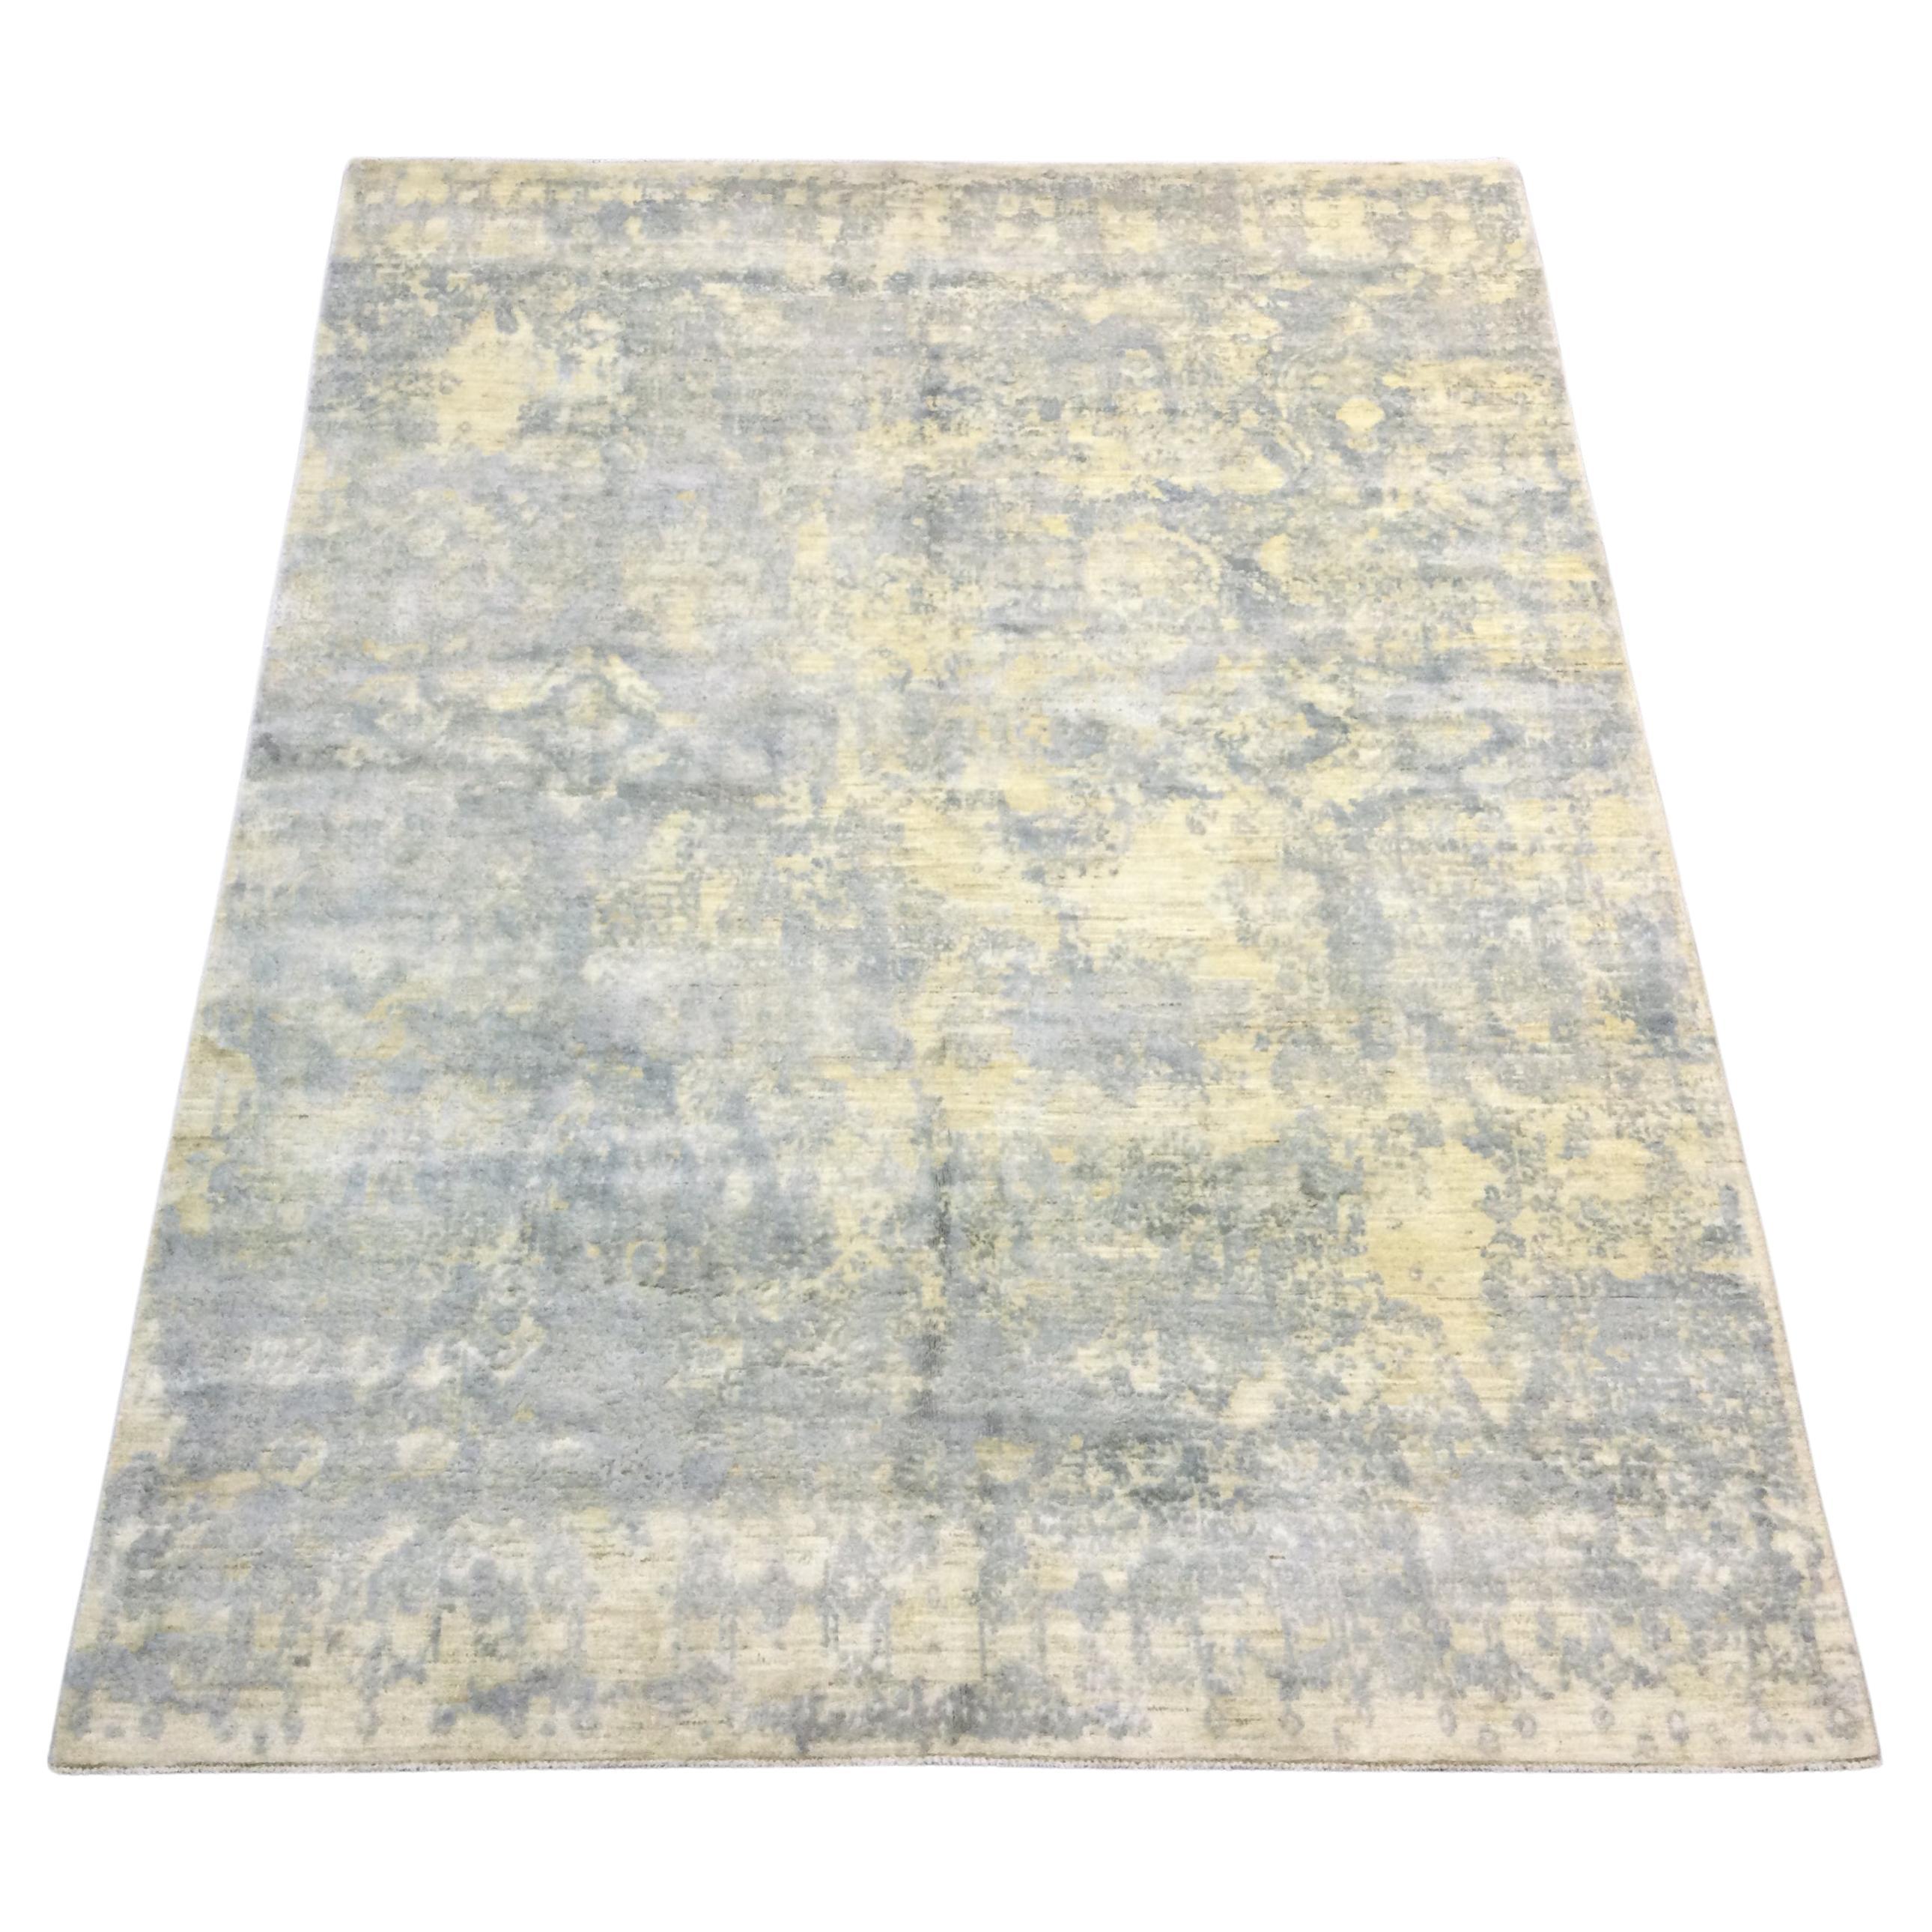 Contemporary Rug. Abstract Design. 3.20 X 2.45 m. For Sale